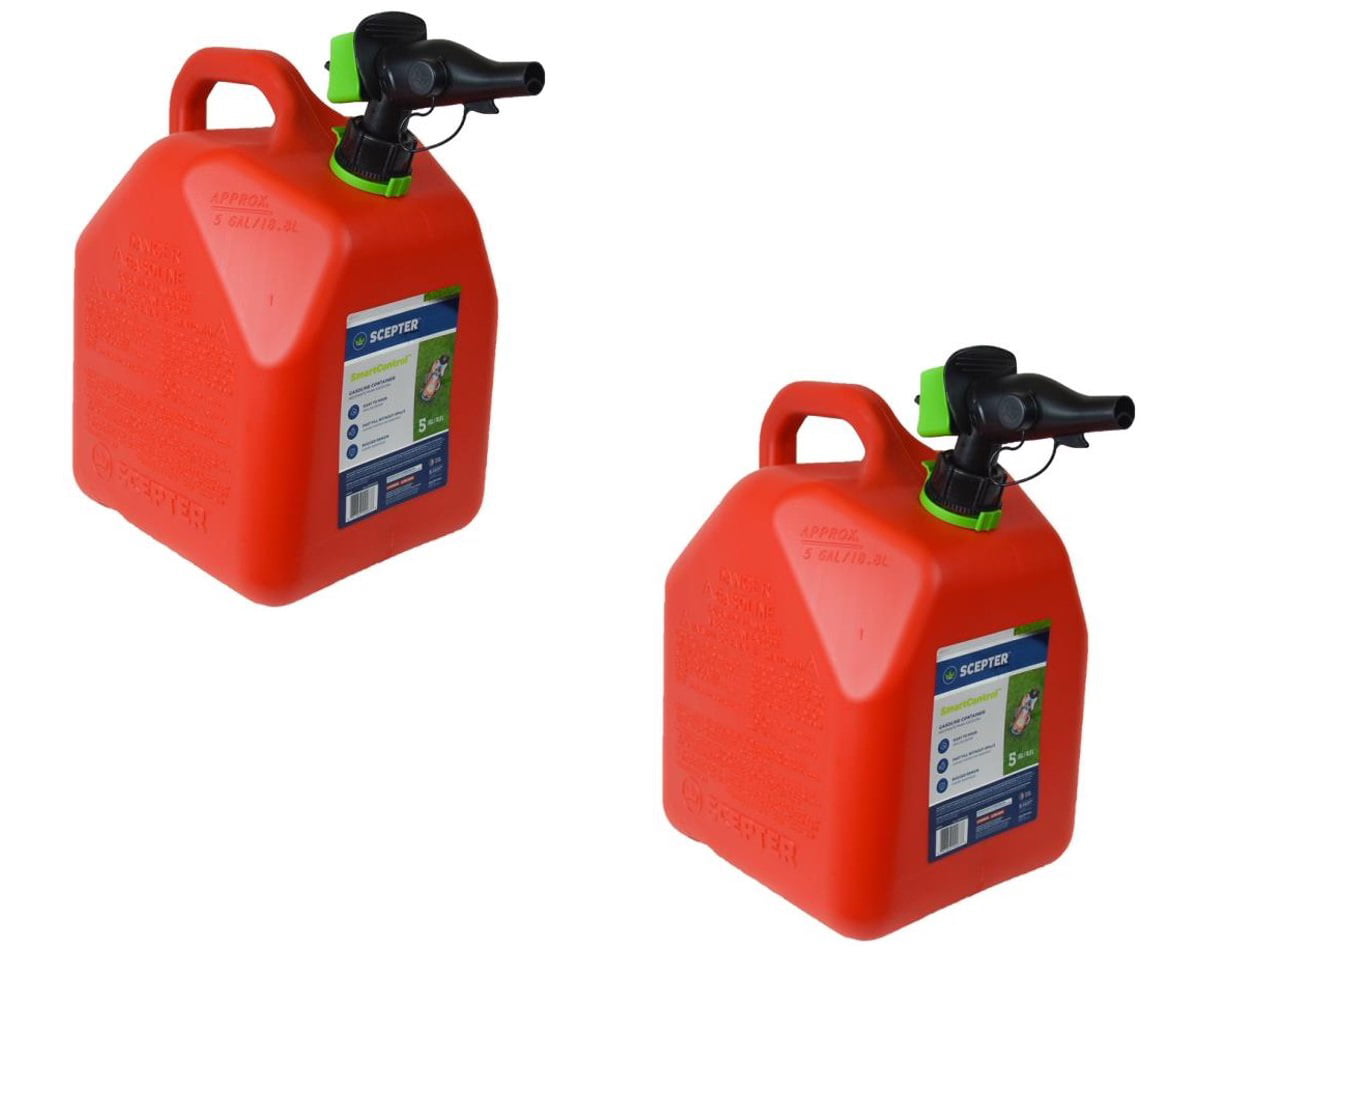 Scepter 5 Gallon SmartControl Gas Can, FR1G501, Red -2 Pack